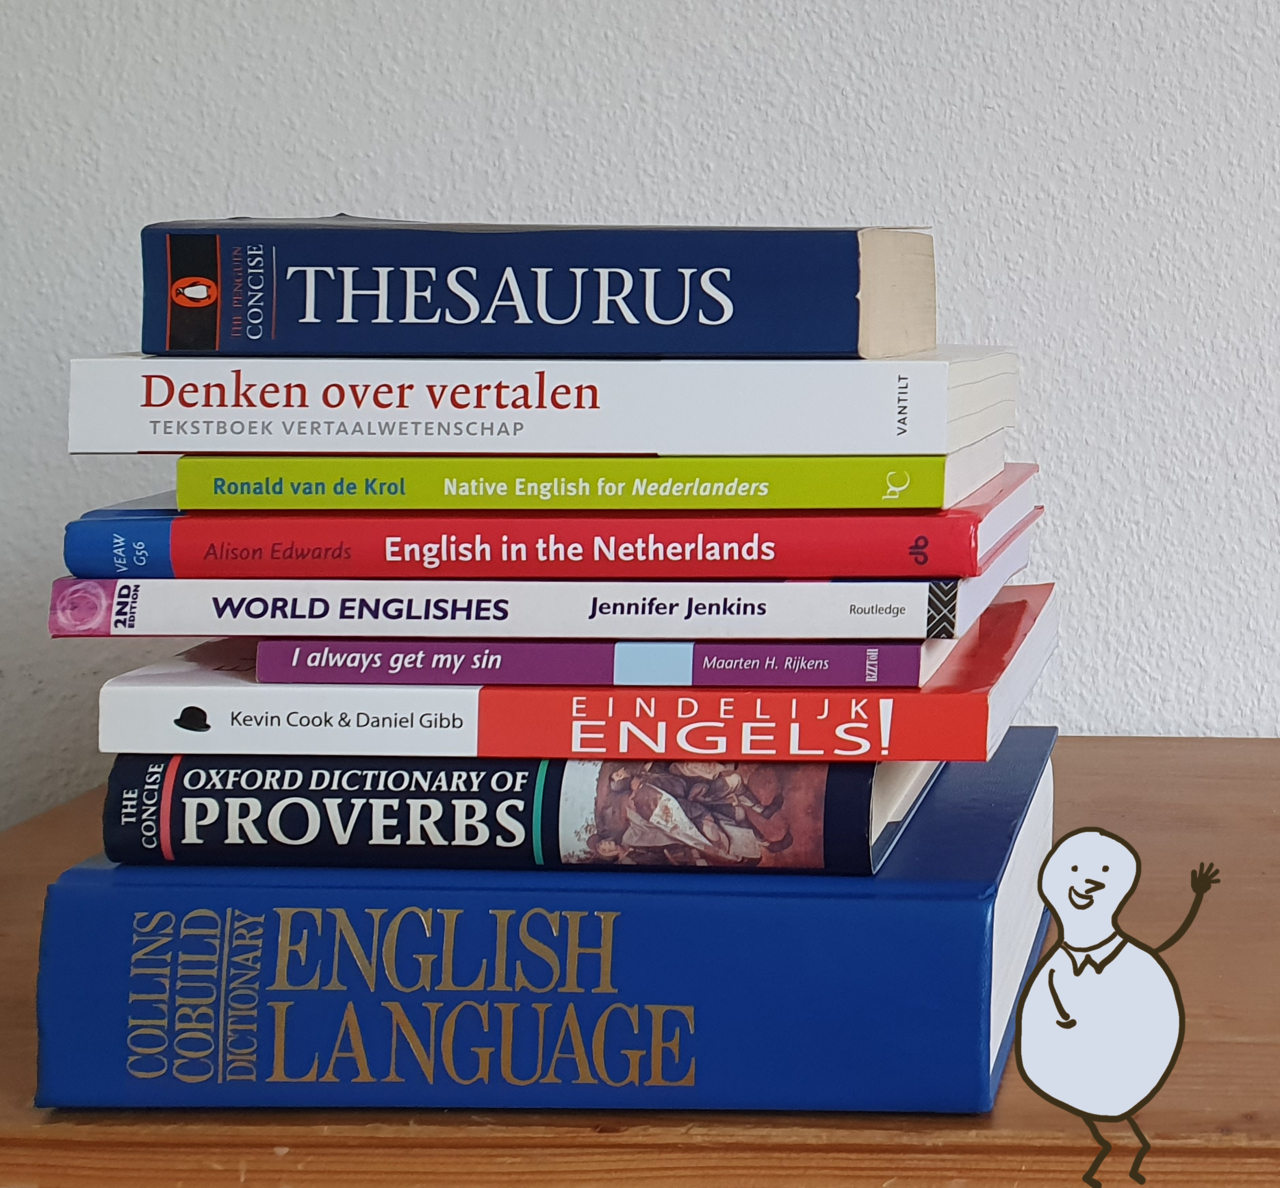 English and the Dutch